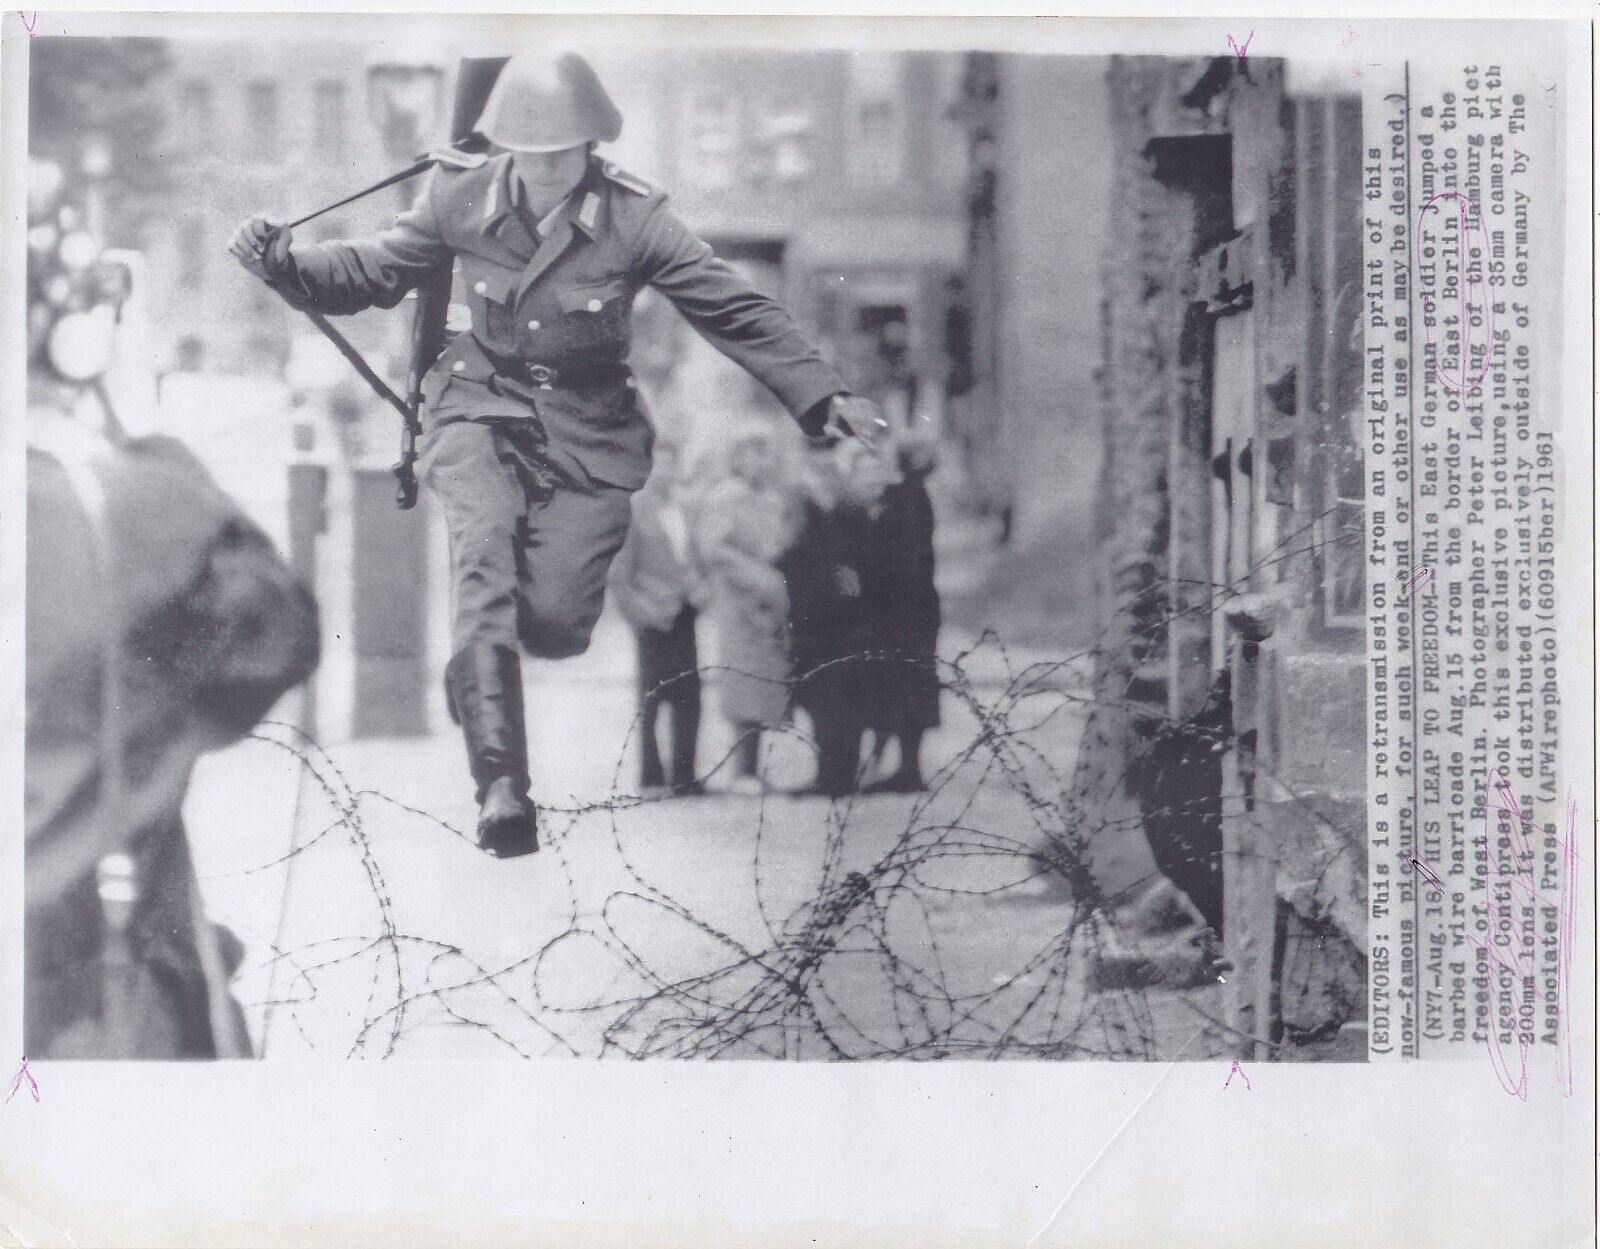 Jump to Freedom press photo, German Soldier, cold war photo, Germany Berlin Wall